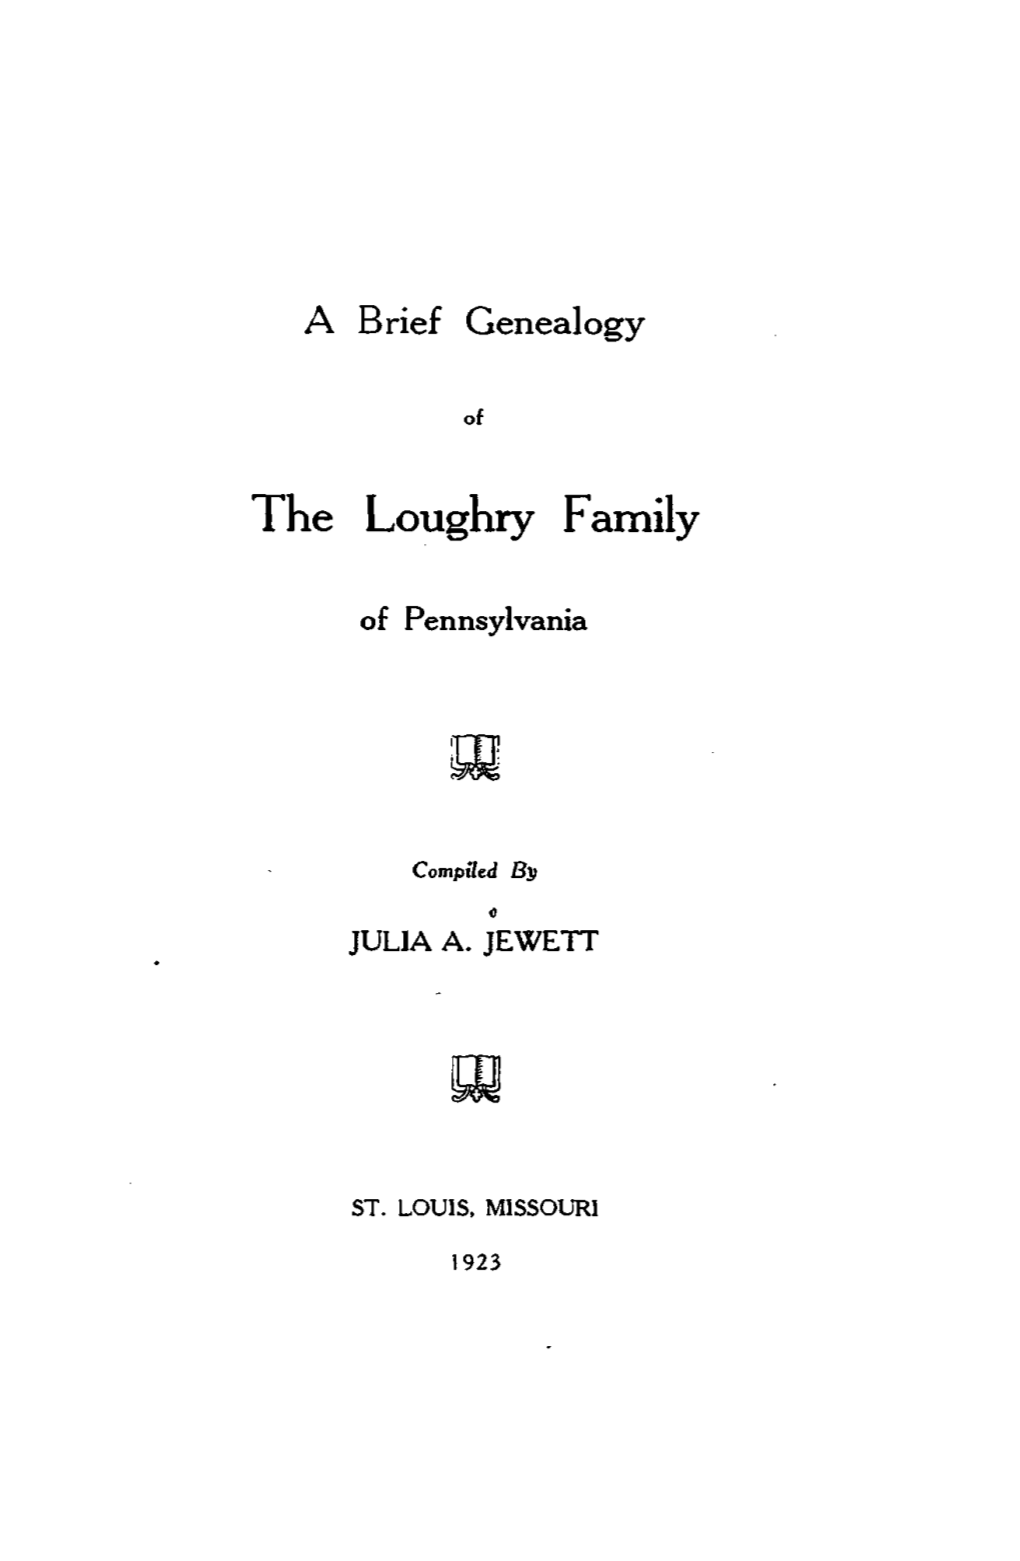 The Loughry Family